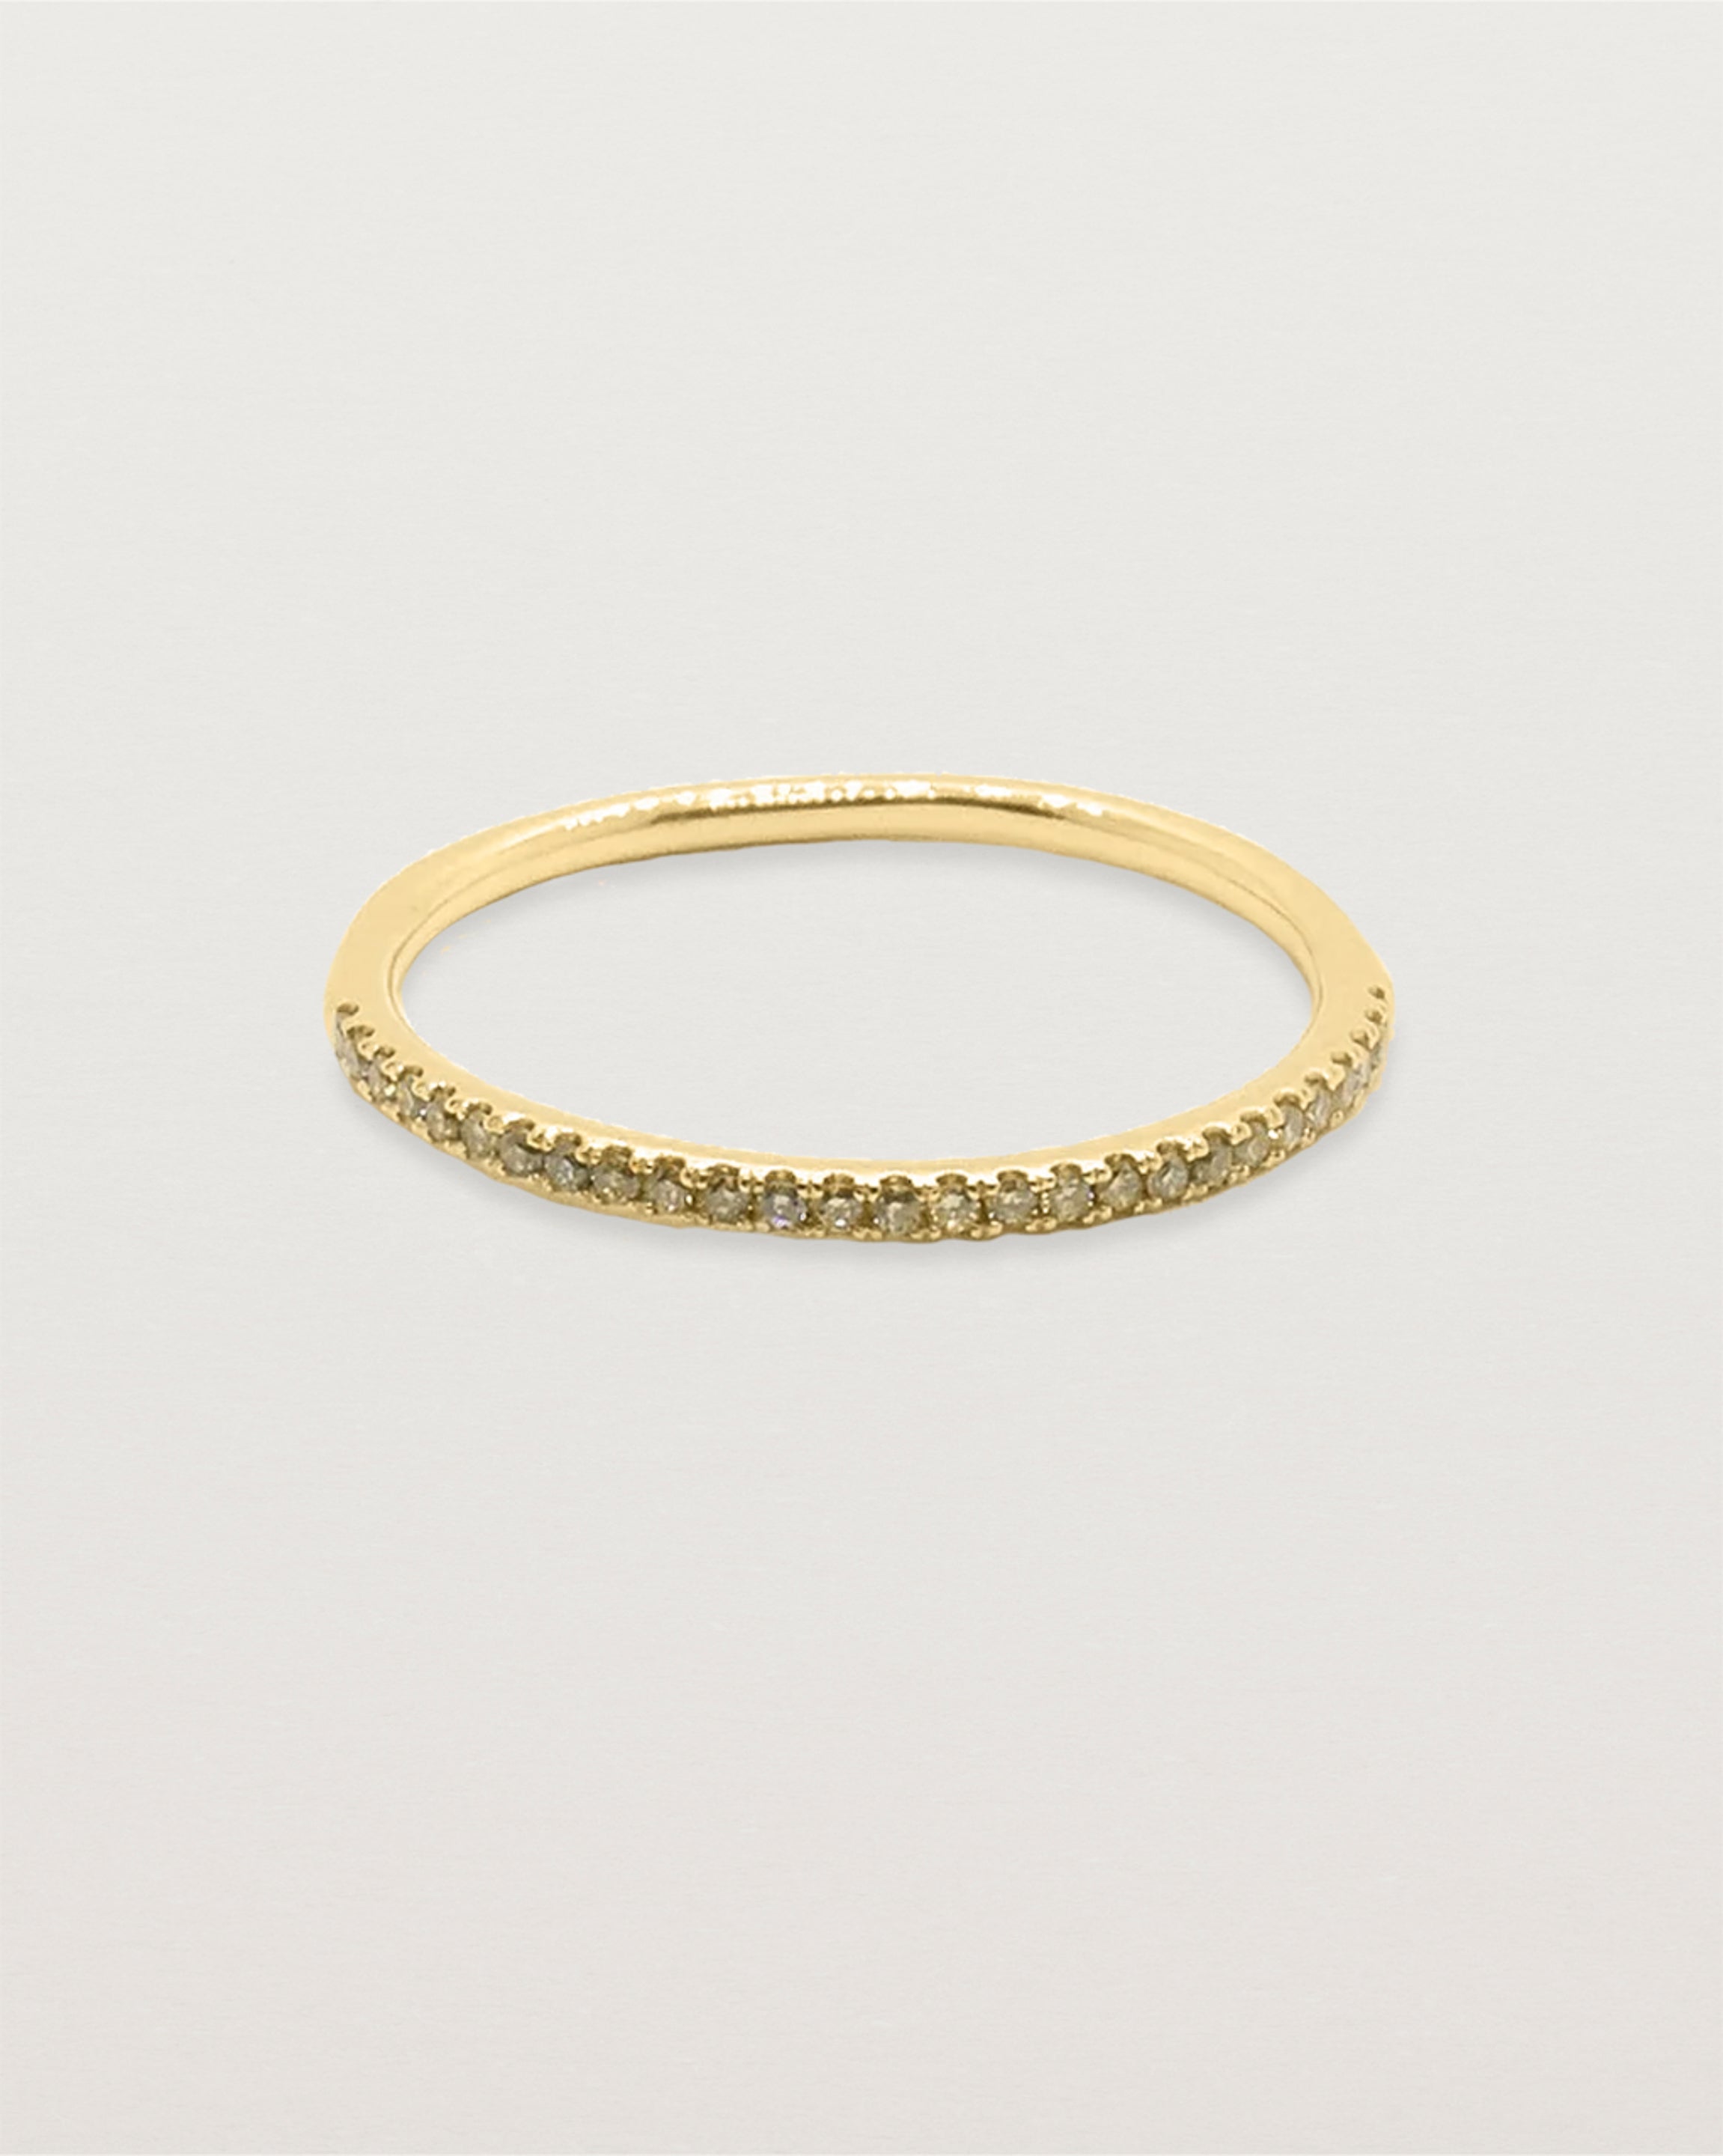 A half band of champagne diamonds set on a yellow gold ring